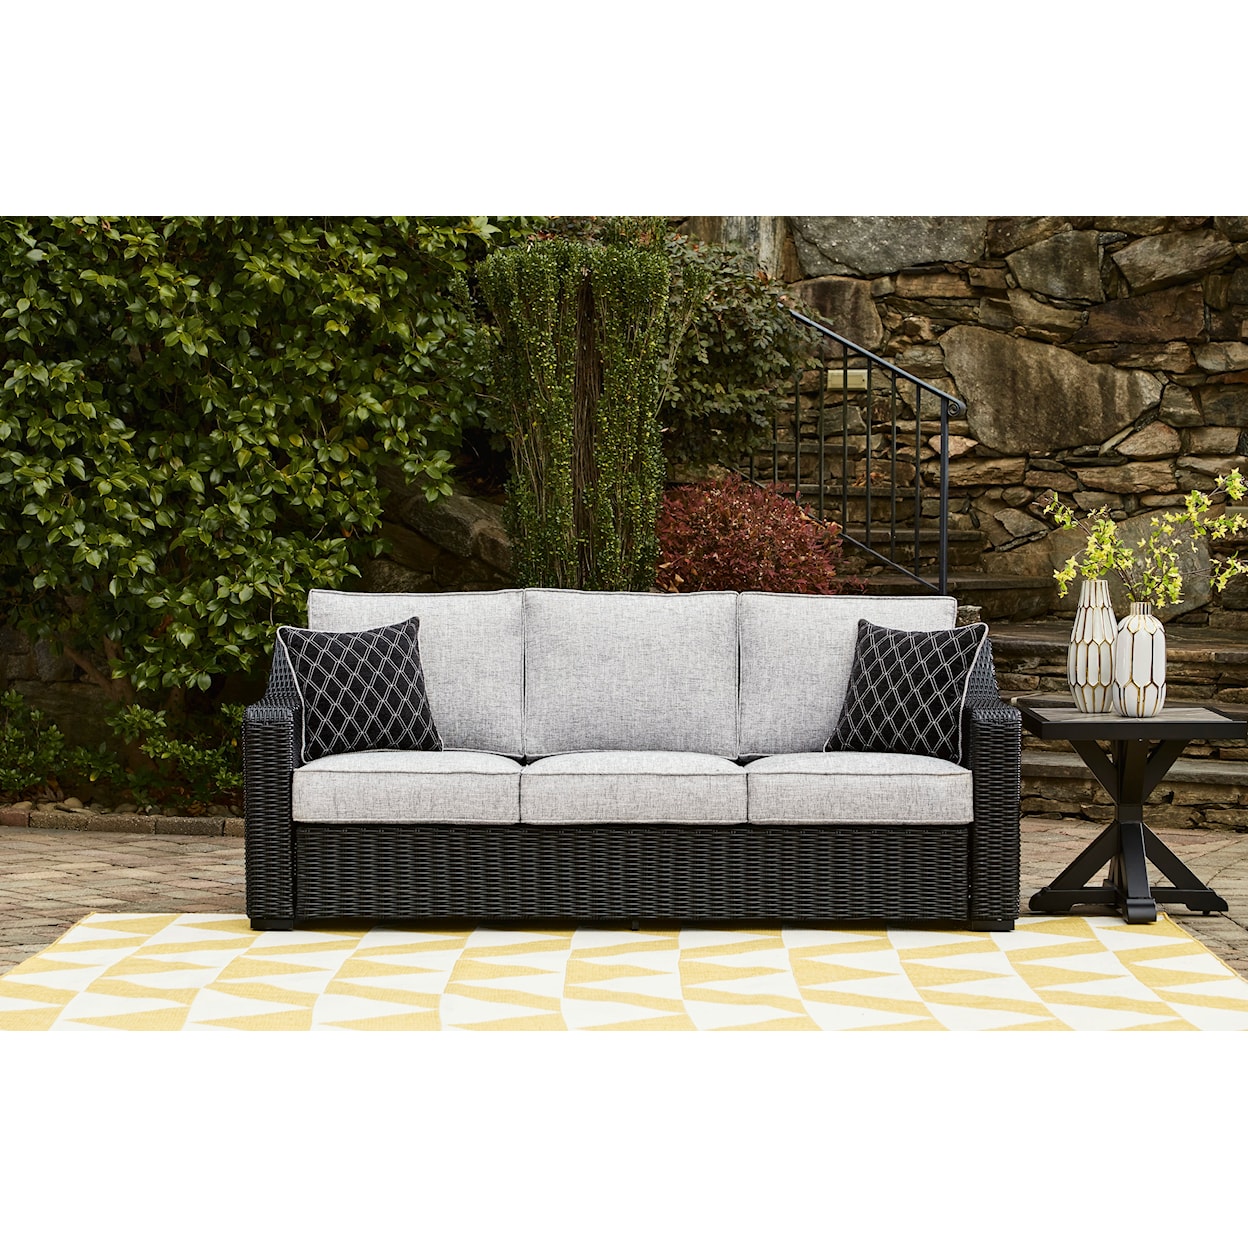 Signature Design by Ashley Beachcroft Outdoor Sofa With Cushion